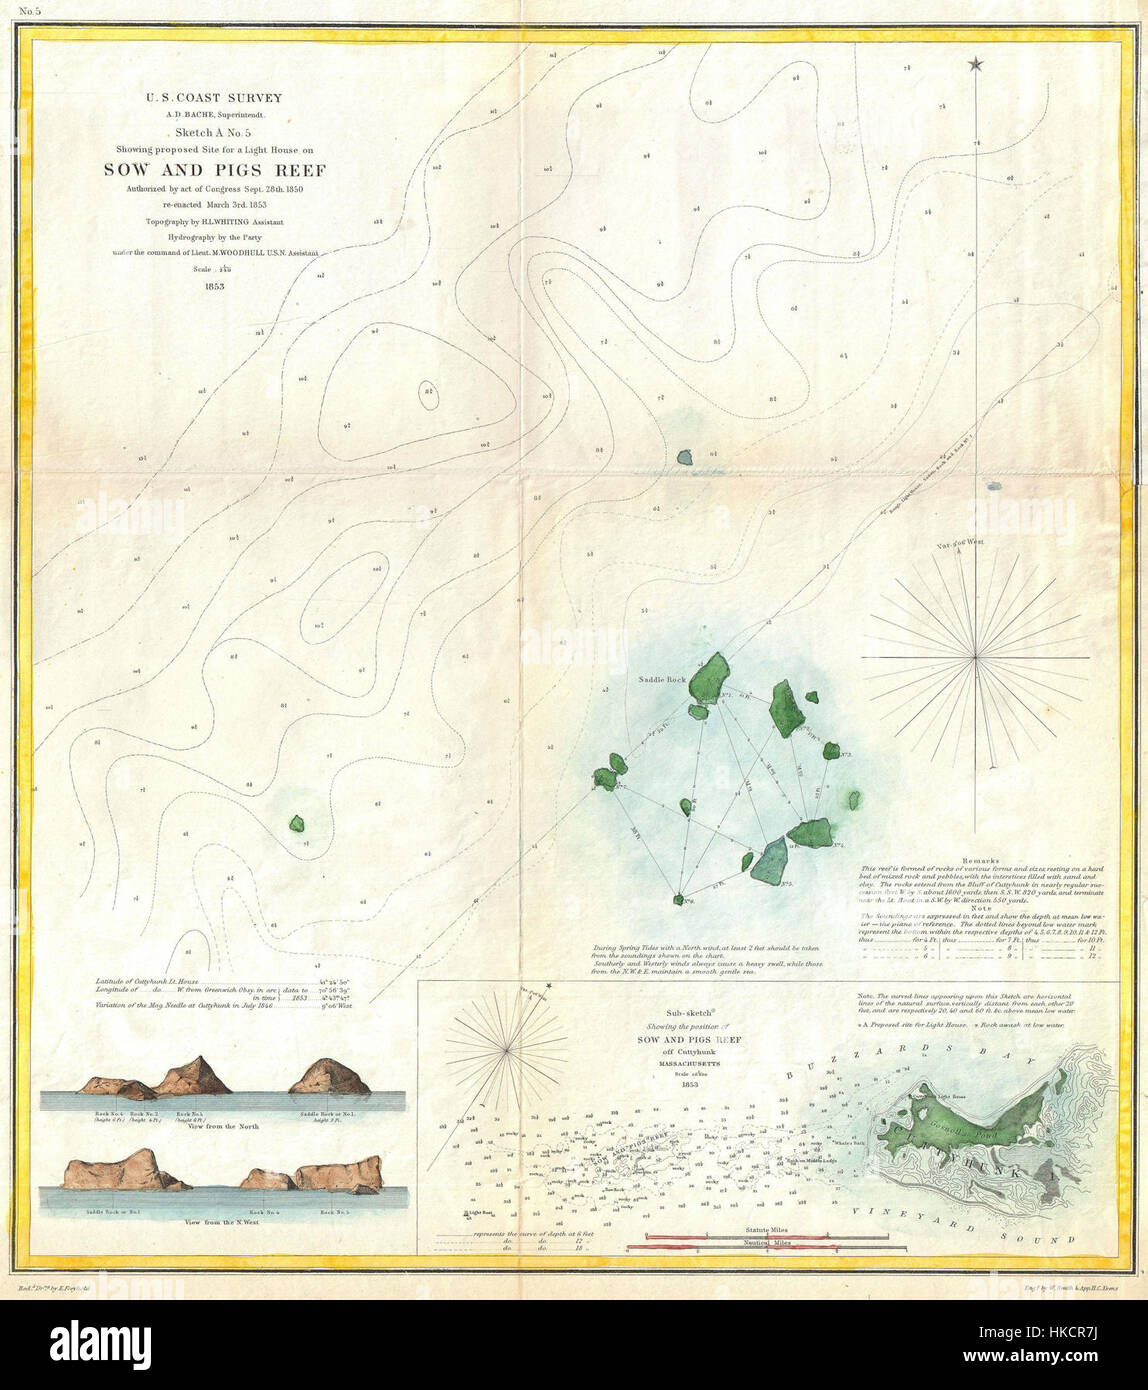 1853 U.S. Coast Survey Map or Chart of Sow and Pigs Reef off Marthas Vineyard, Massachussetts   Geographicus   SowandPigsReef uscs 1853 Stock Photo